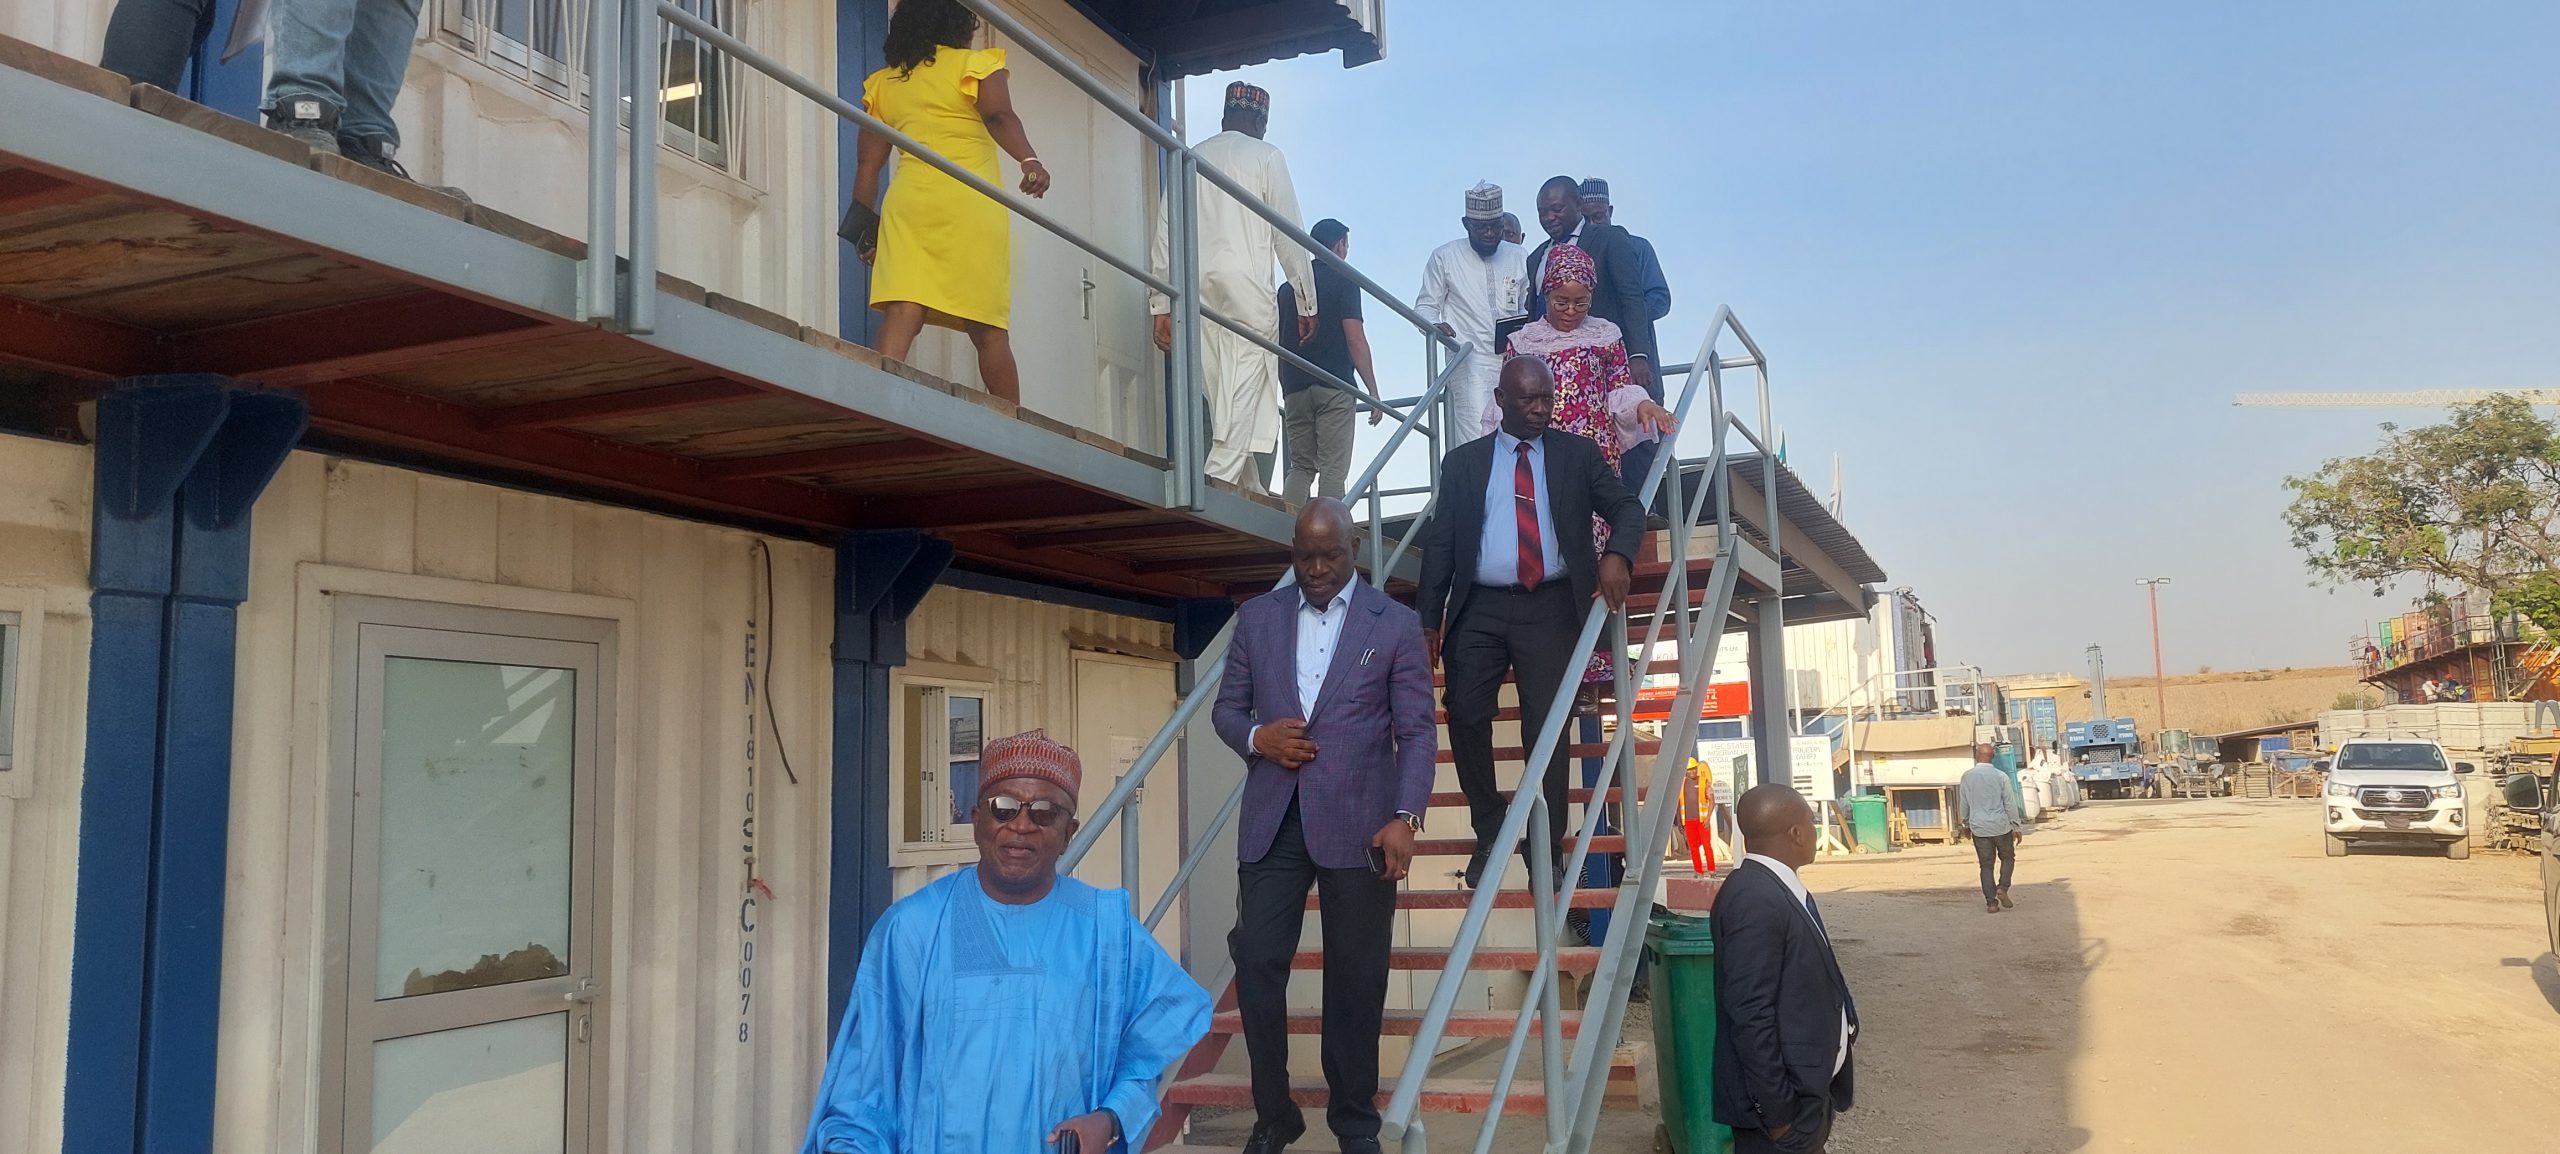 Photonews: The NUPRC Board Chairman Malam Isa Modibbo with the Commission Chief Executive Engr Gbenga Komolafe FNSE in company of the project management team paid a visit to the “BARREL” to inspect and ascertain the level of work at the project site.